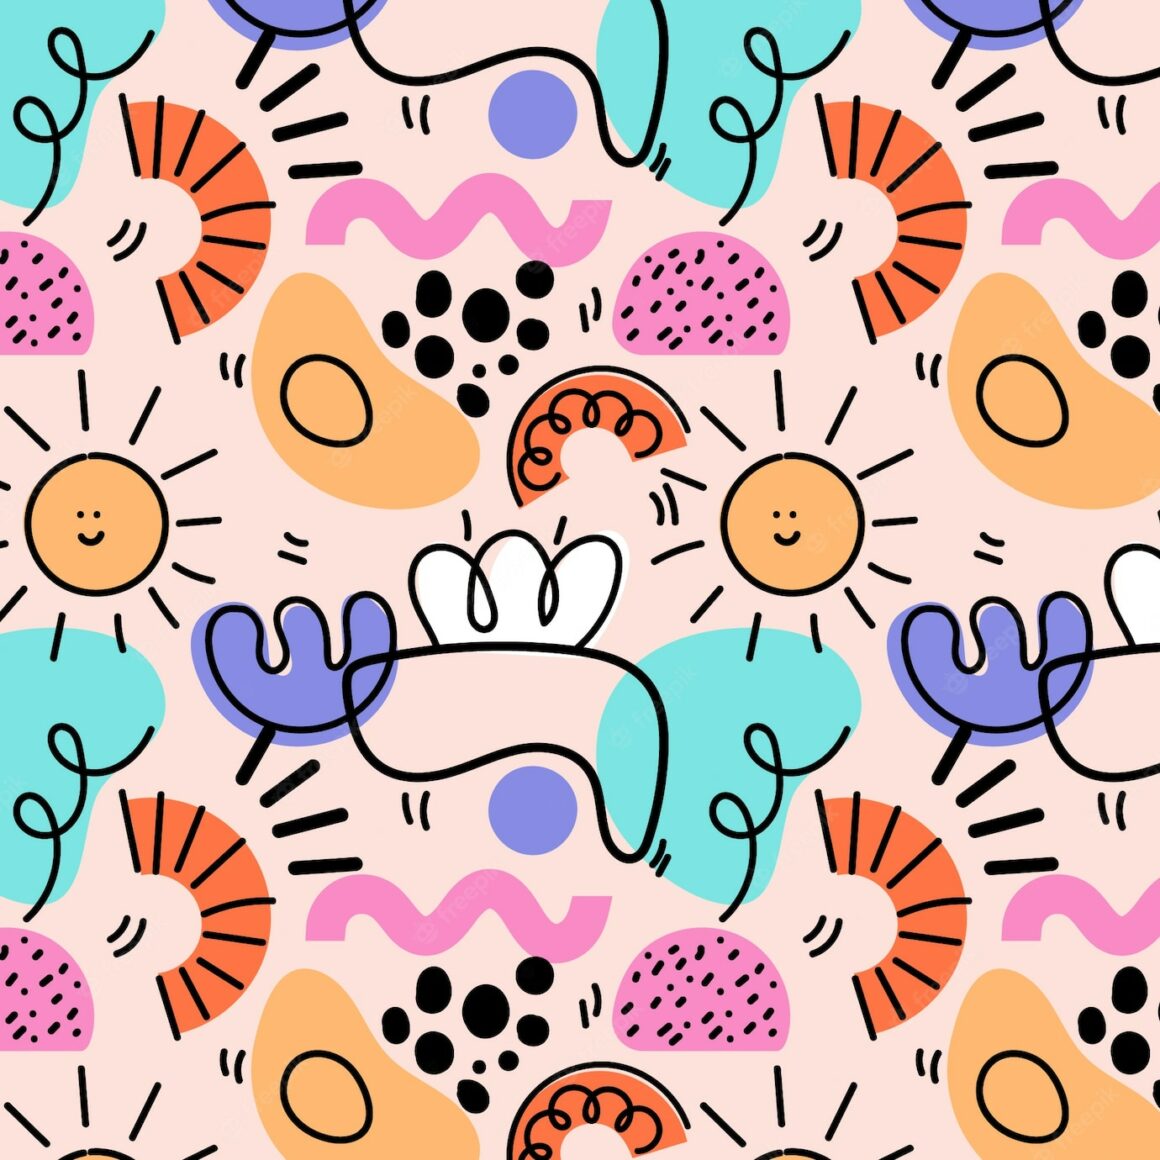 Hand drawn abstract doodle pattern